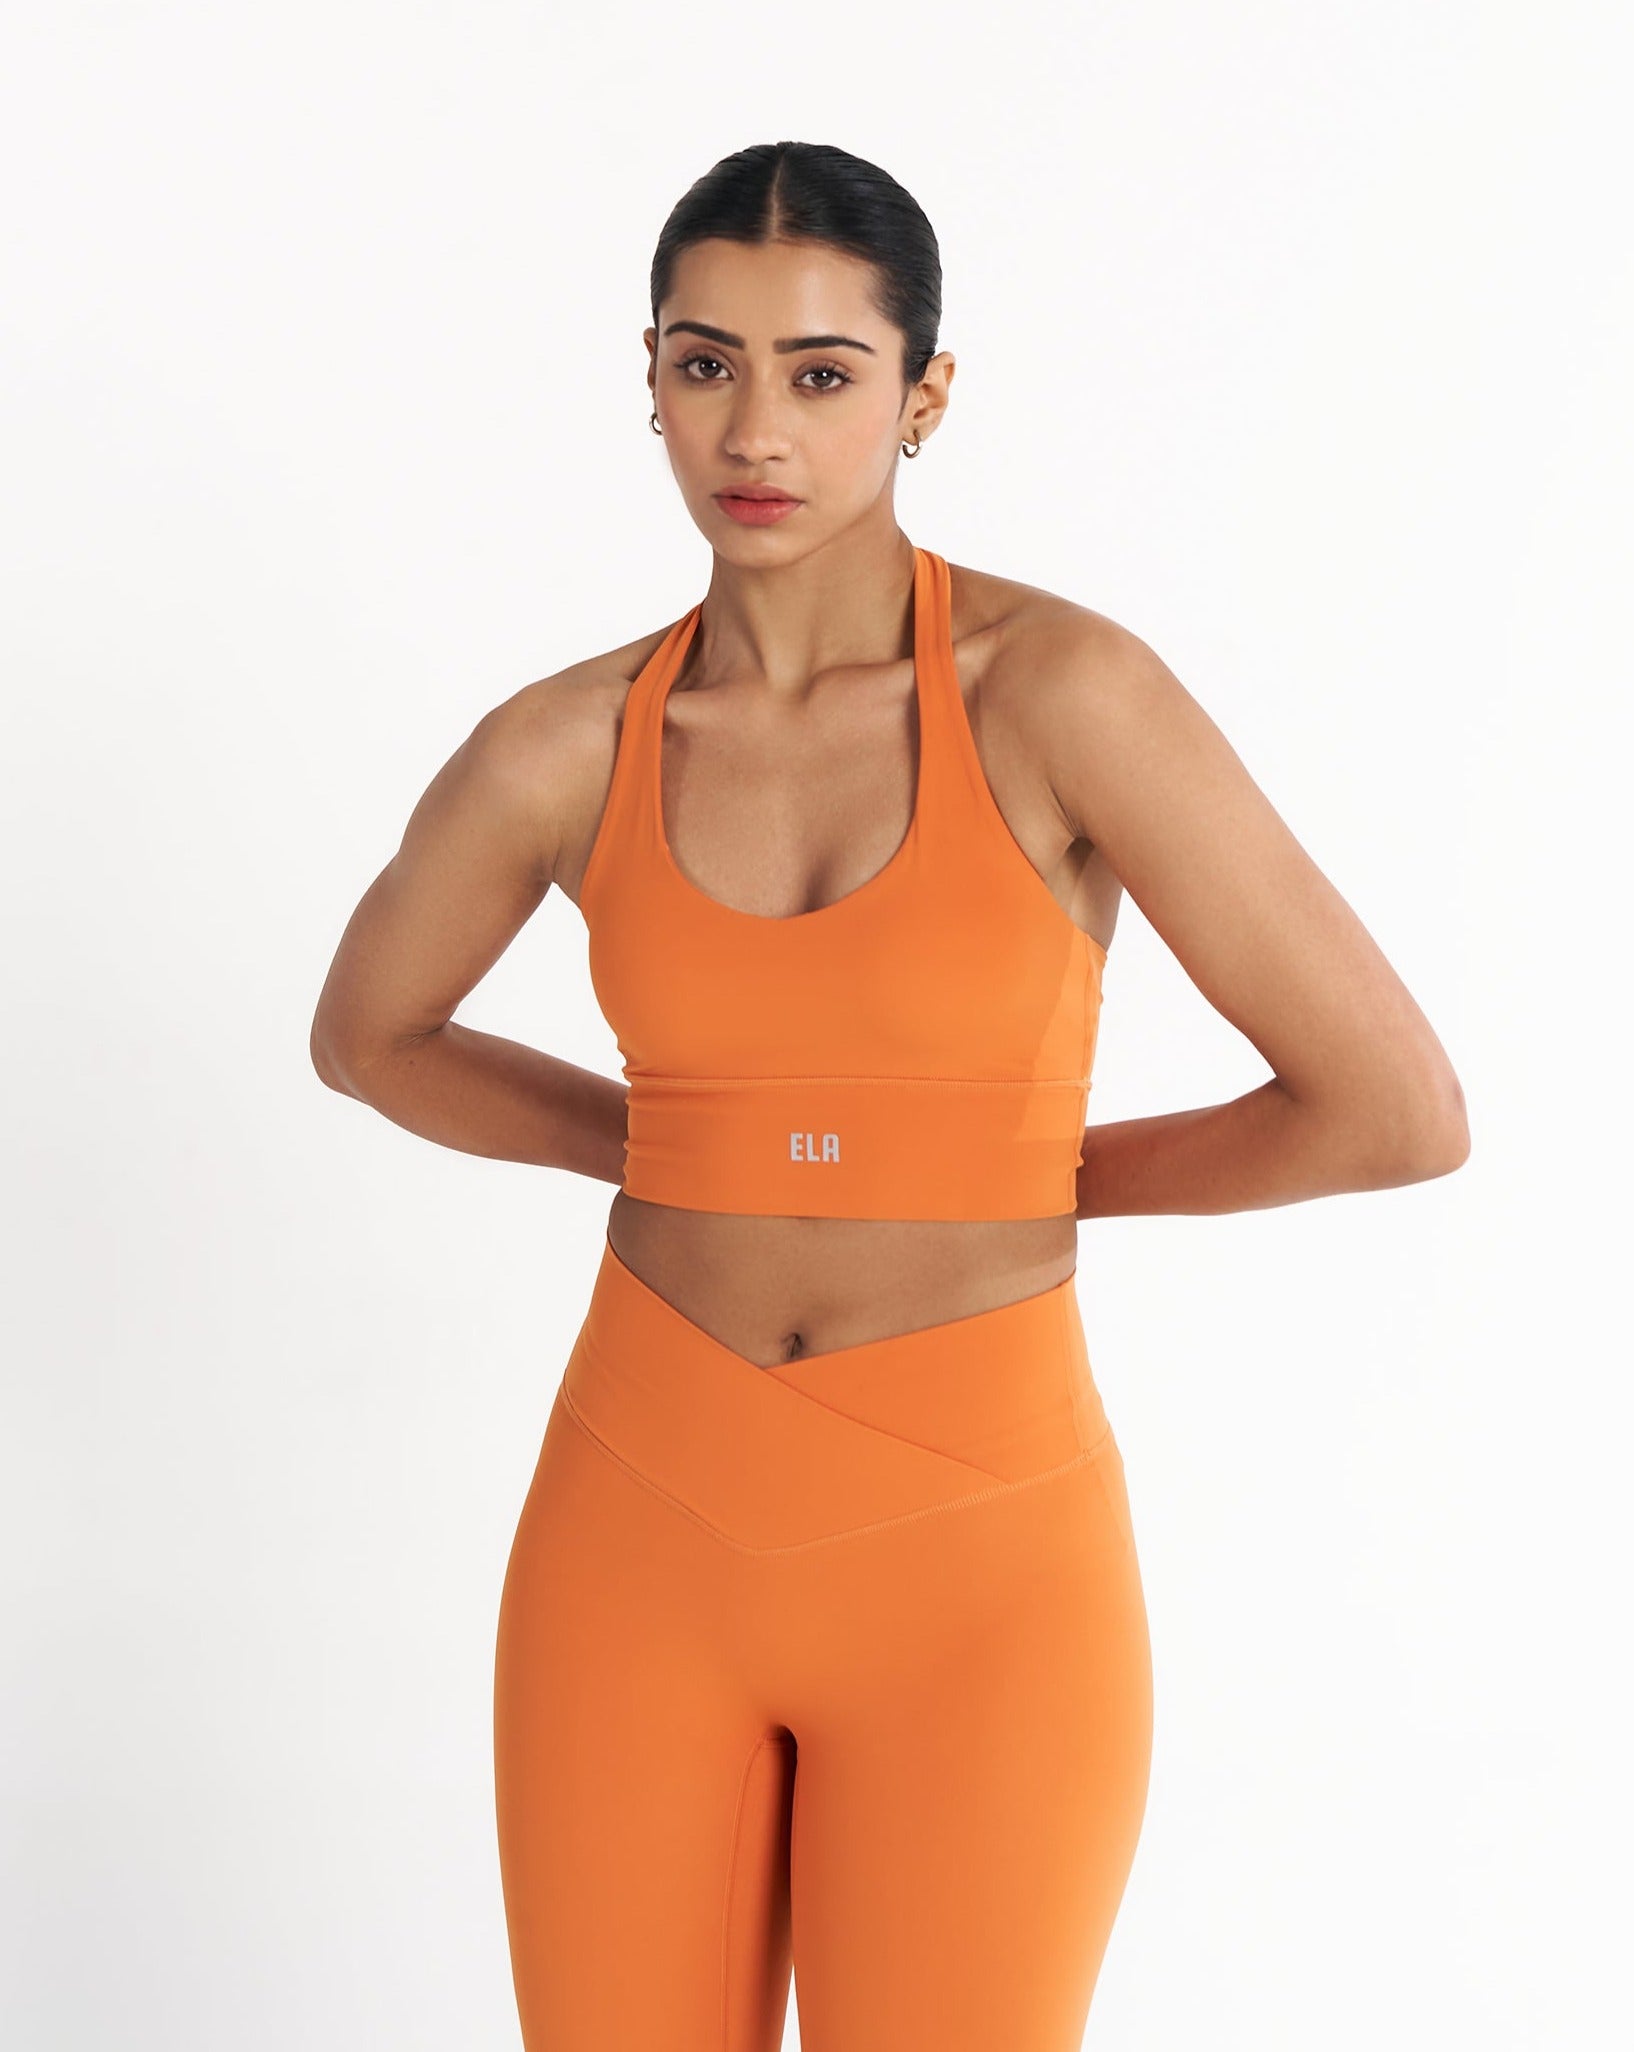 Yellow Oranges Print Yoga U Neck Orange Sports Bra With Padded Cups For  Women Perfect For Pilates, Gym, And Raceback From Dianweiliu, $13.12